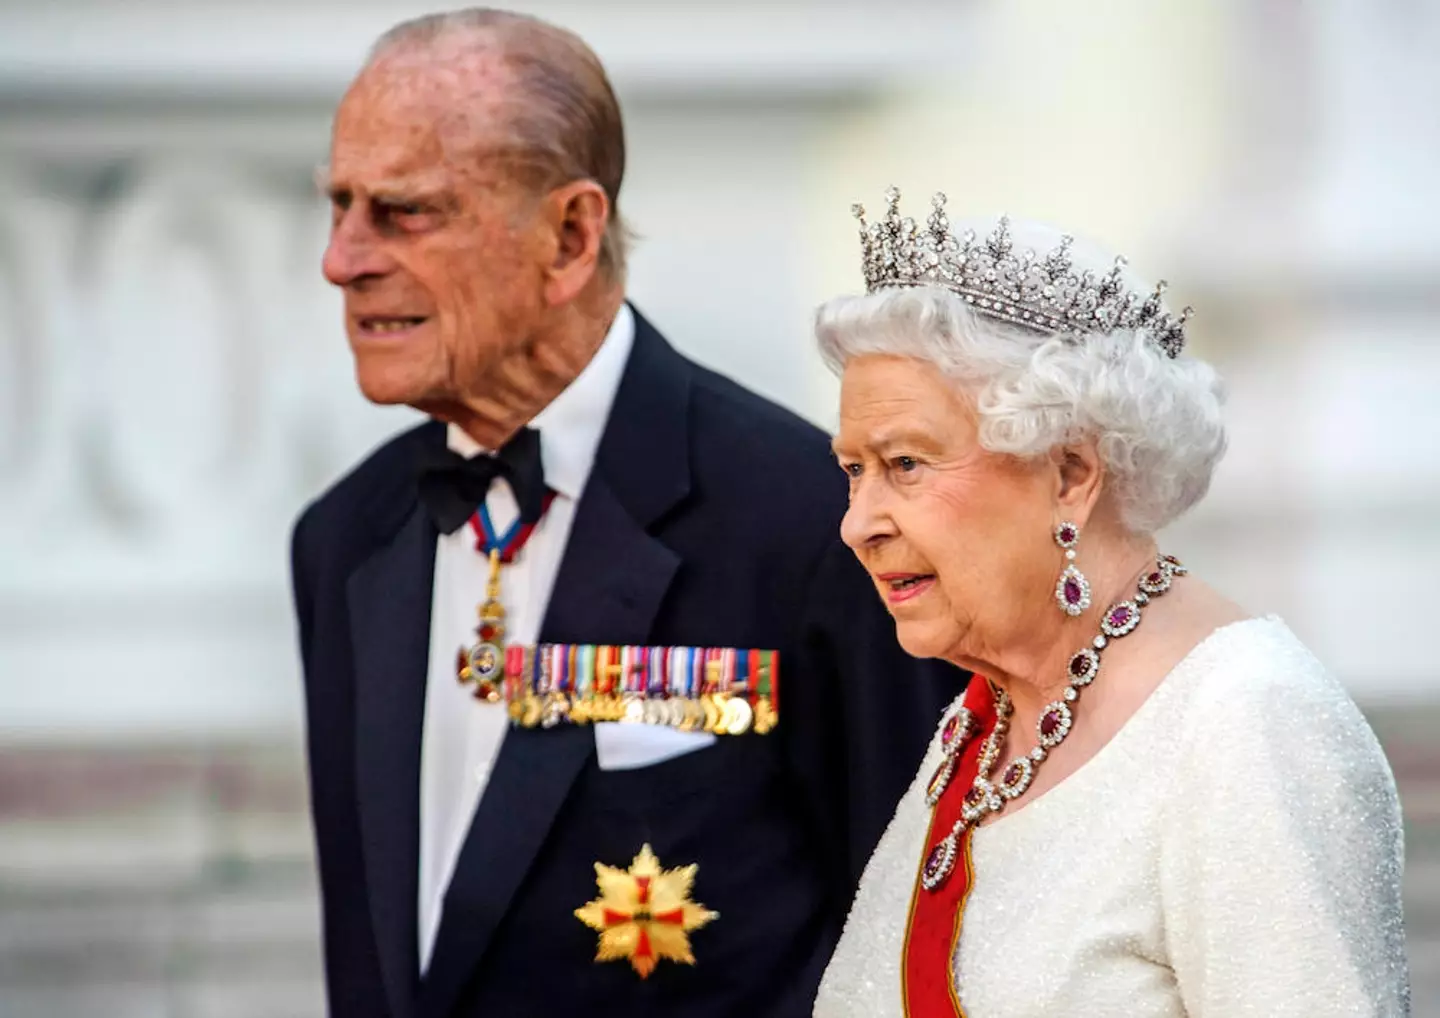 Queen Elizabeth II has been laid to rest alongside Prince Philip, who passed away in April 2021..